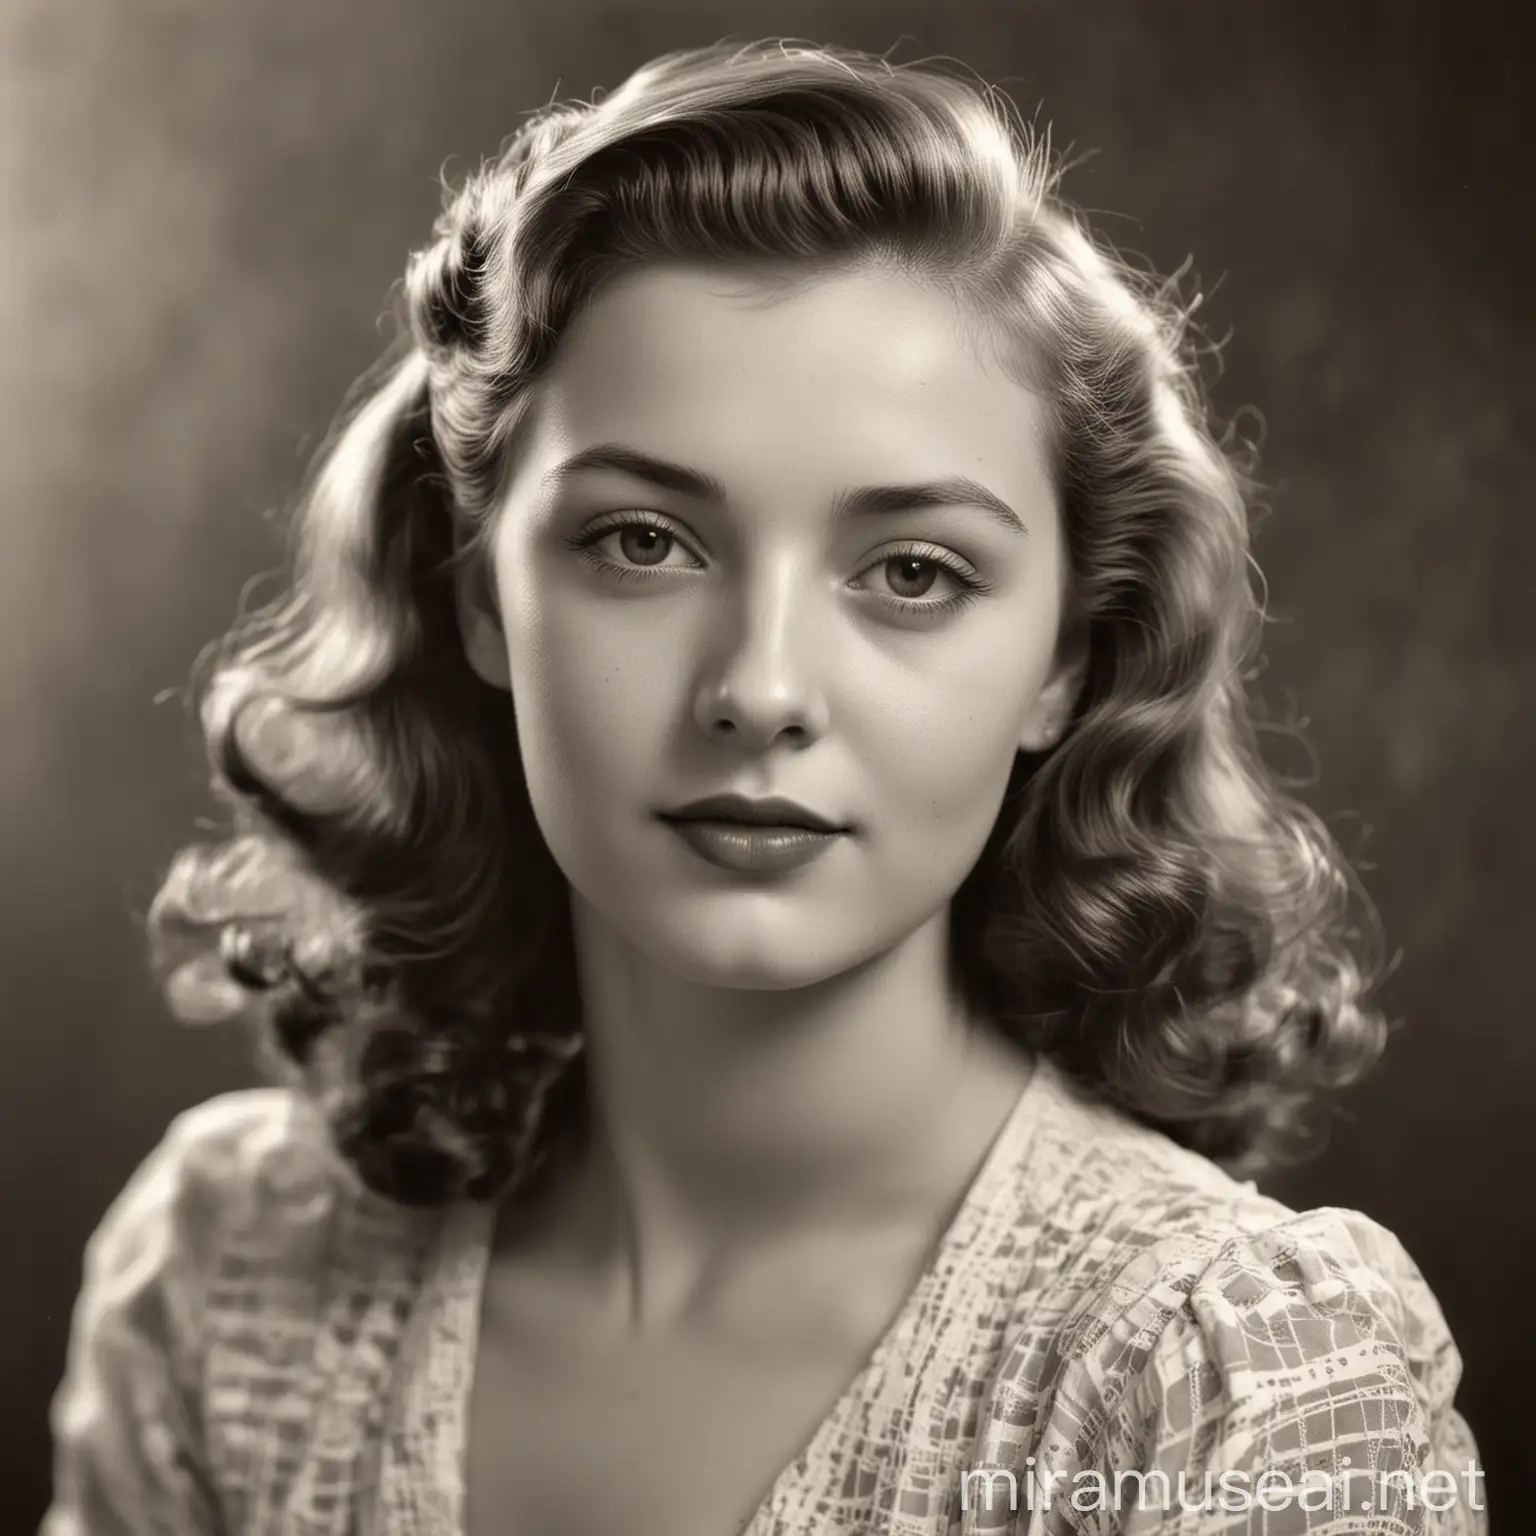 1940s Vintage Portrait of a Beautiful Young Woman in Realistic Black and White Photograph